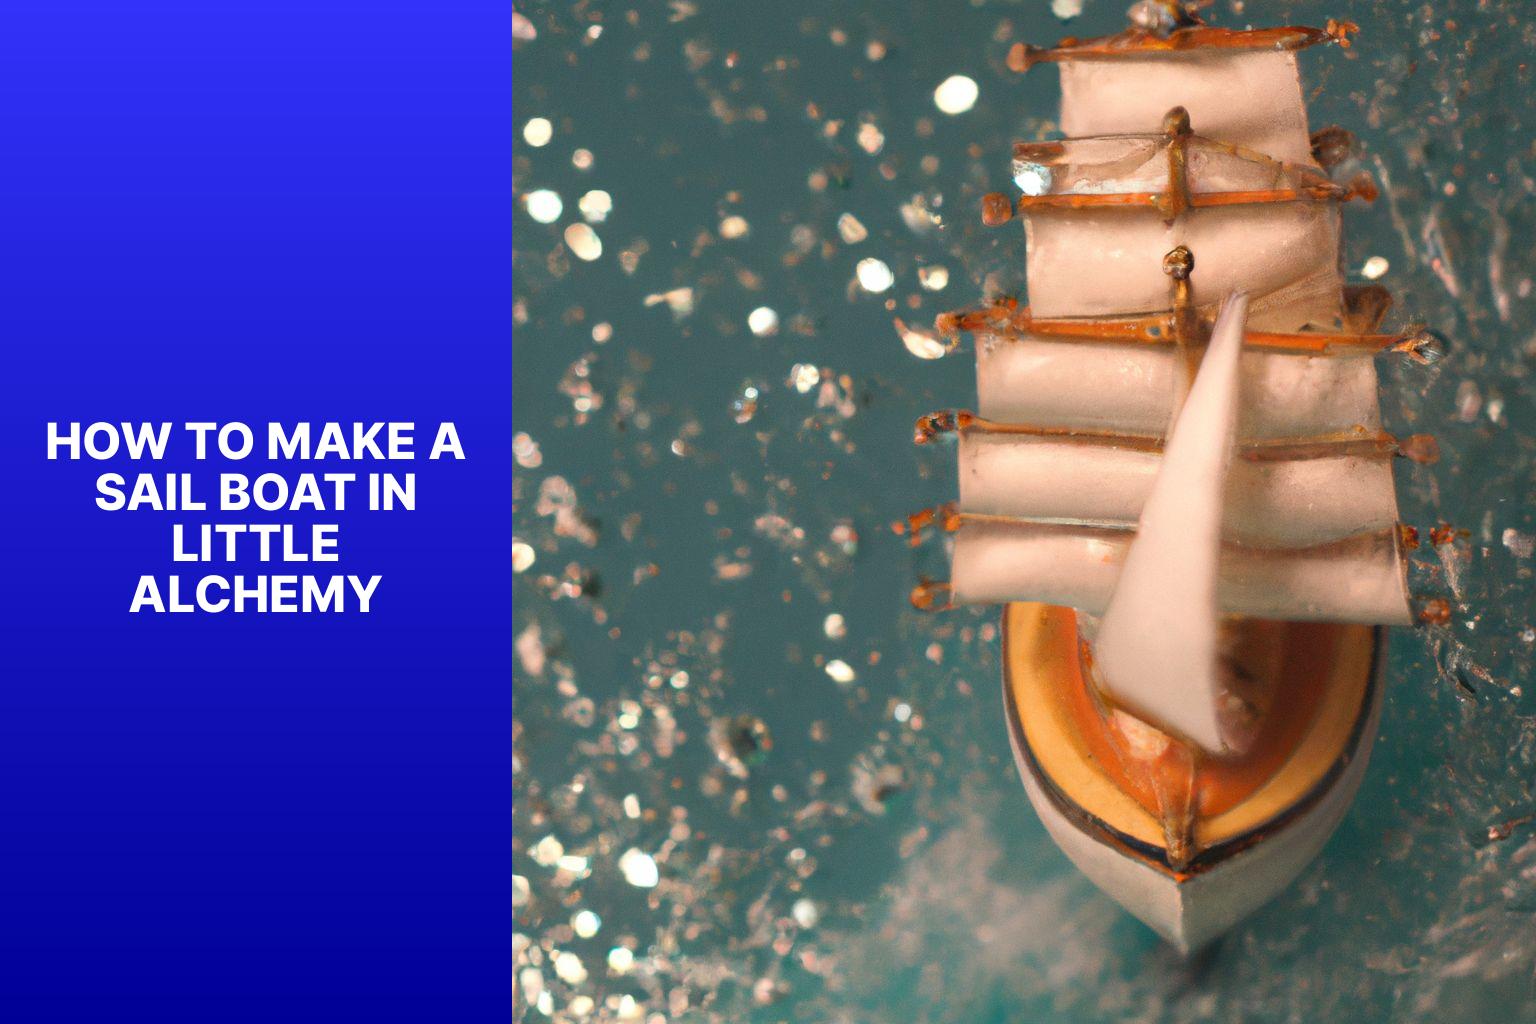 Learn How to Make a Sail Boat in Little Alchemy: Step-by-Step Guide